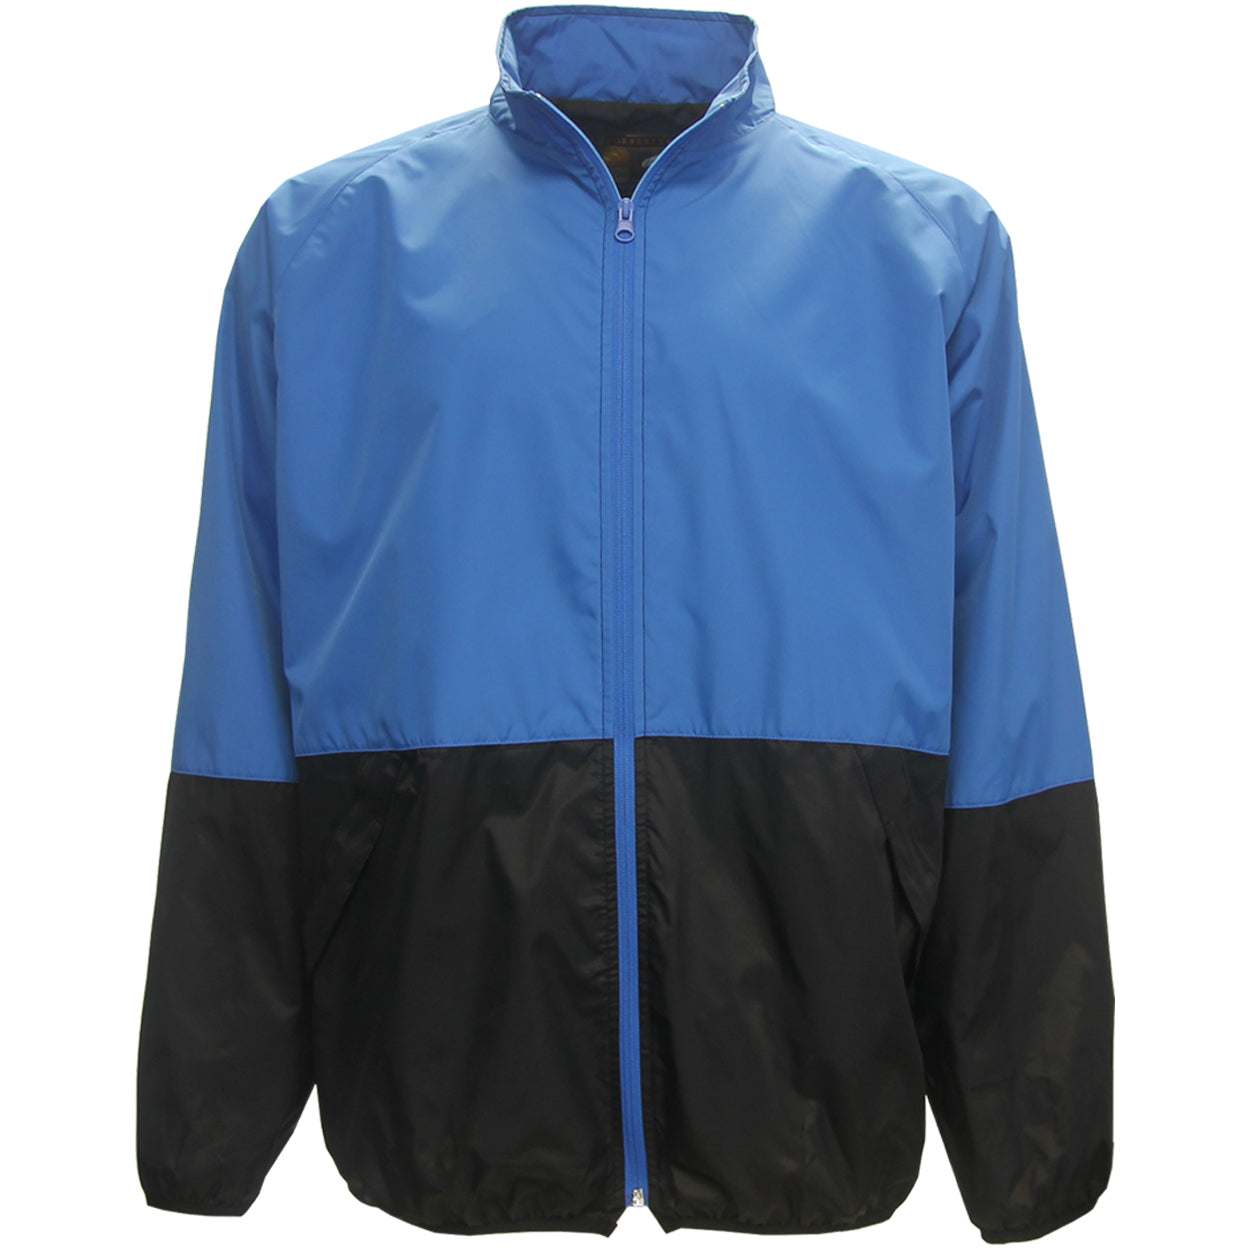 Apparel/Outerwear – Off-Price Golf